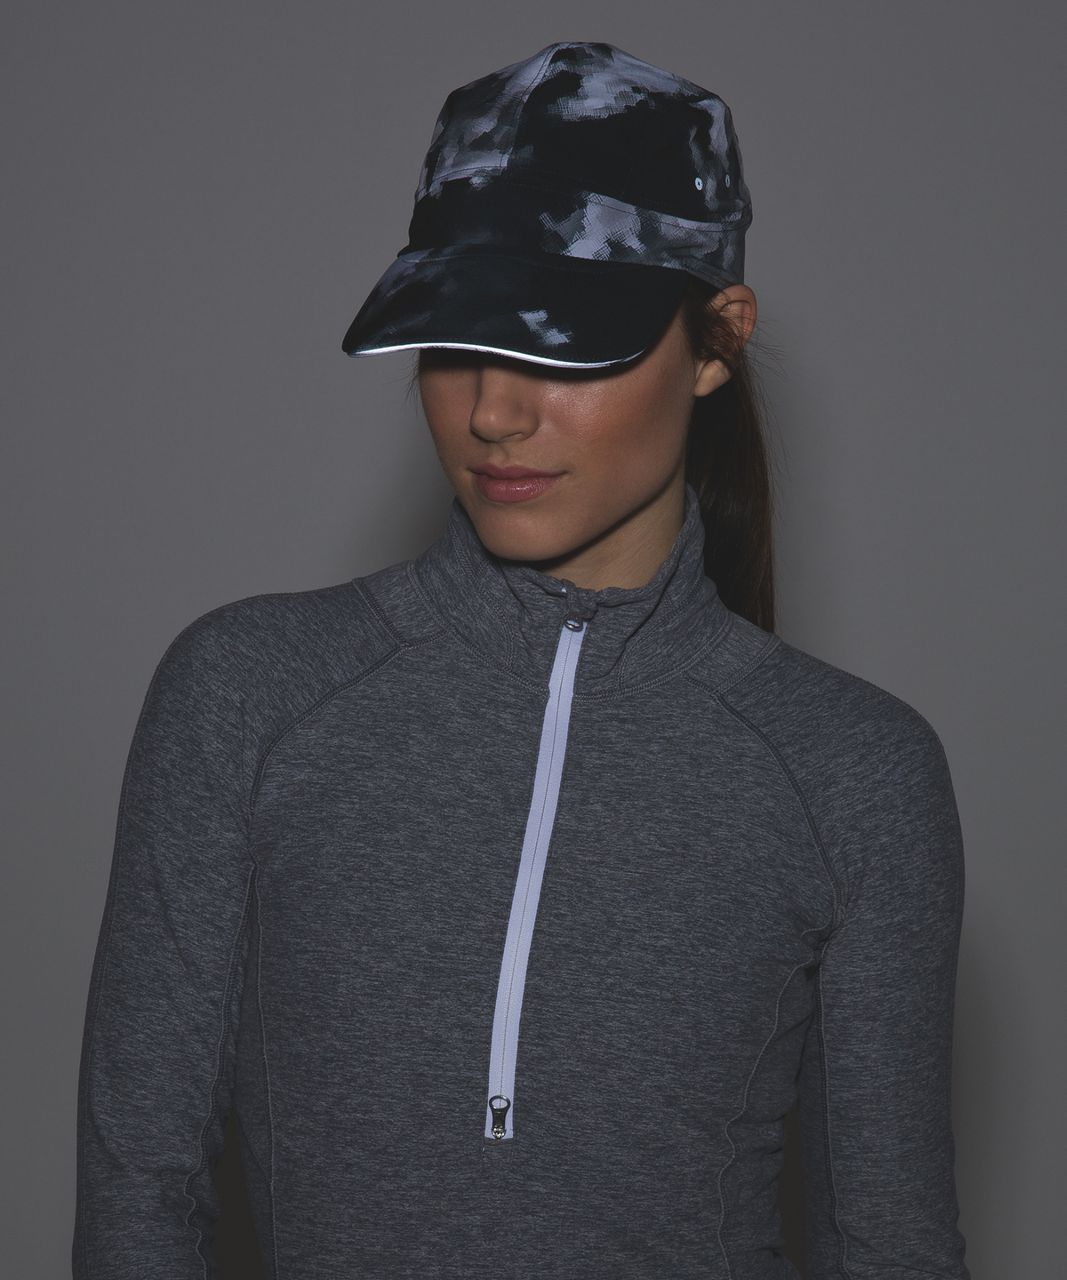 Lululemon Race To Place Run Hat 2.0 - Blooming Pixie White Black